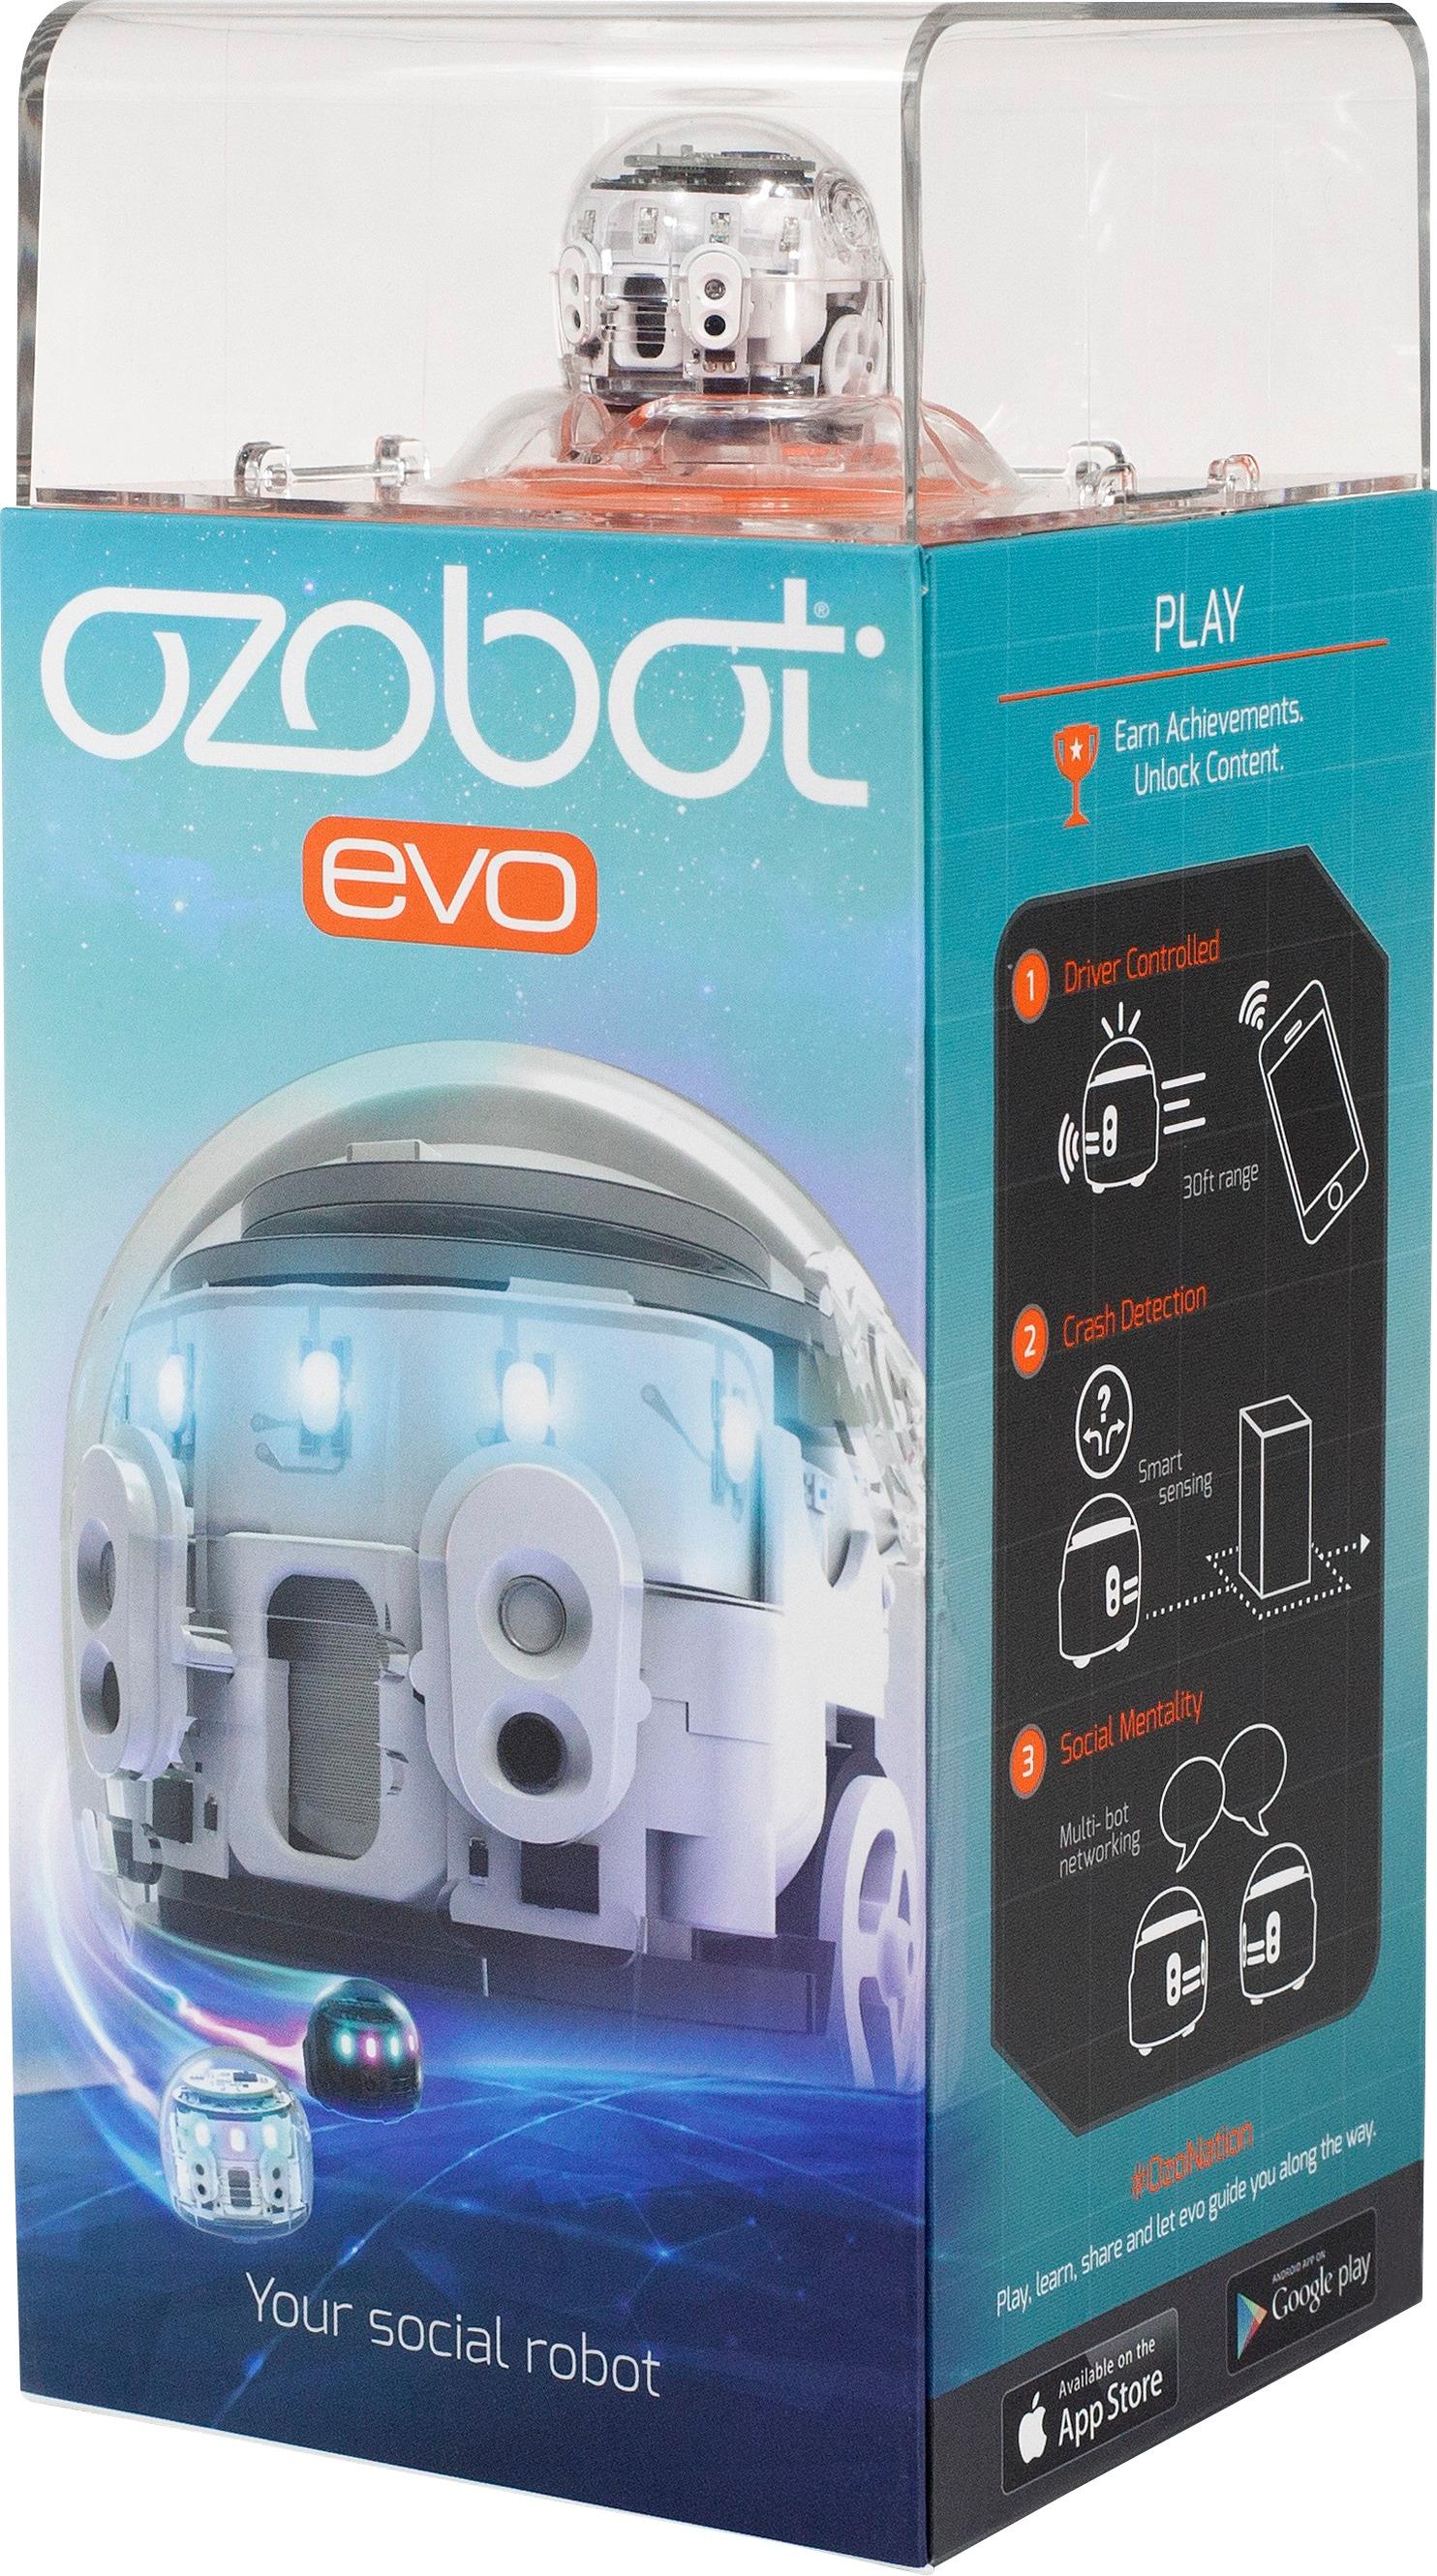 Ozobot Evo Review